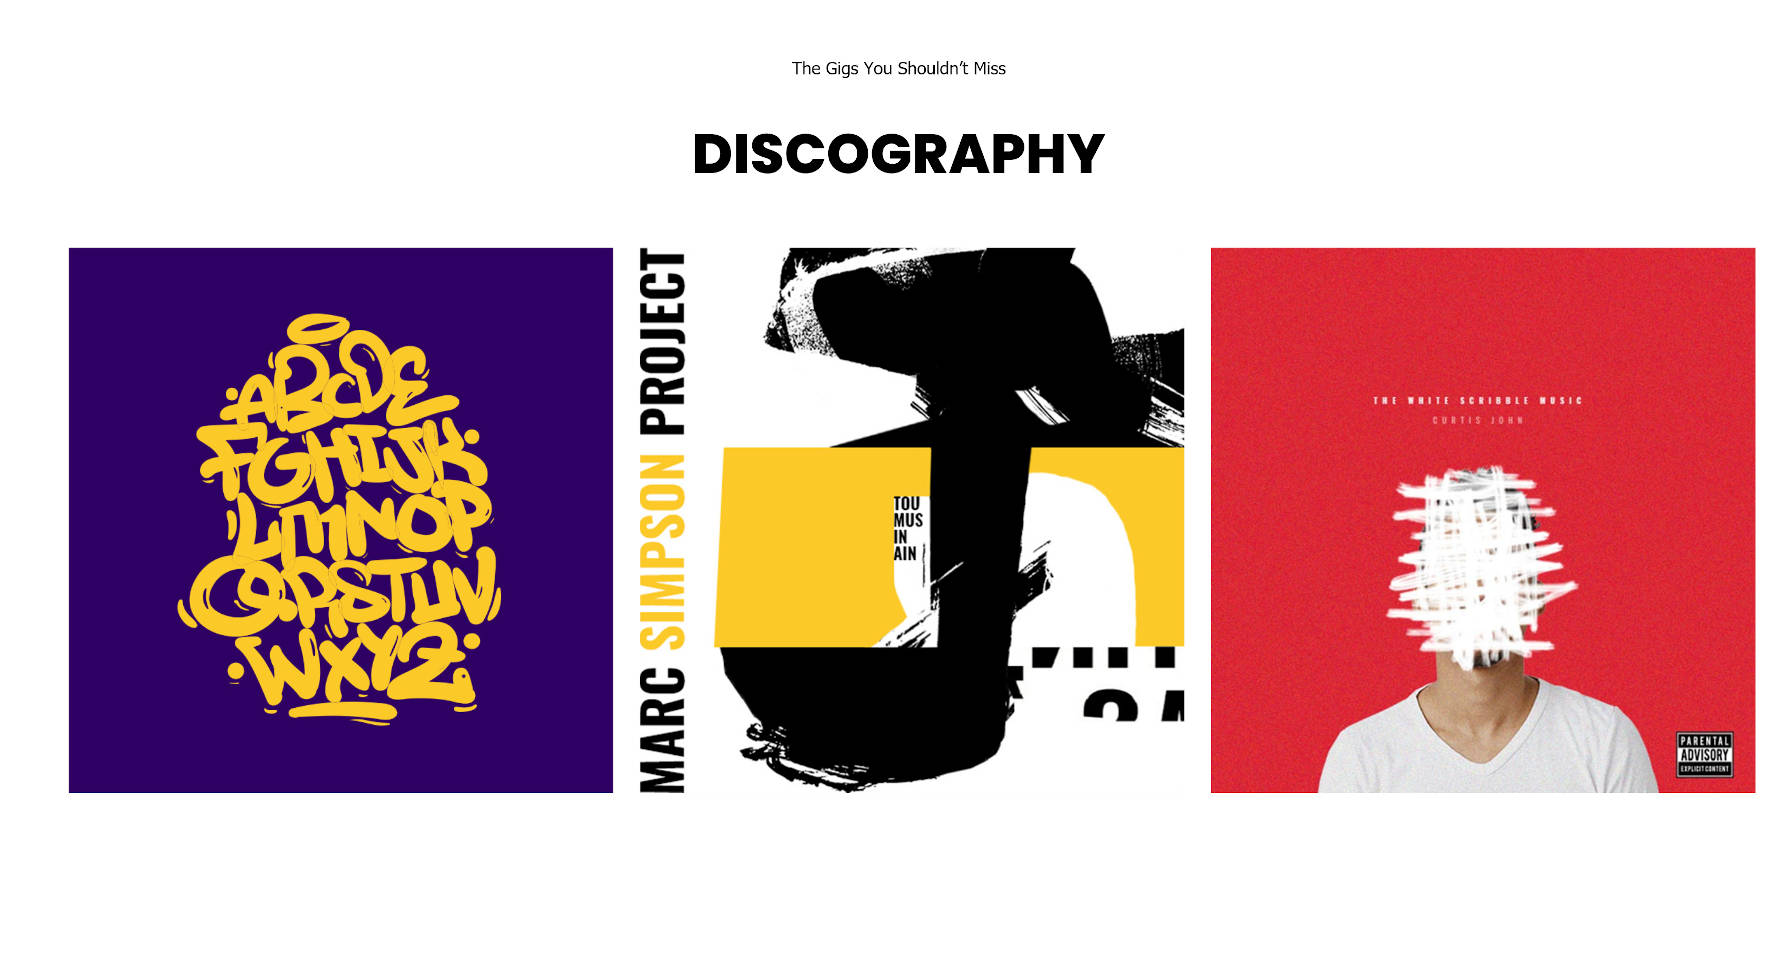 Discography section that lists an artist's albums.